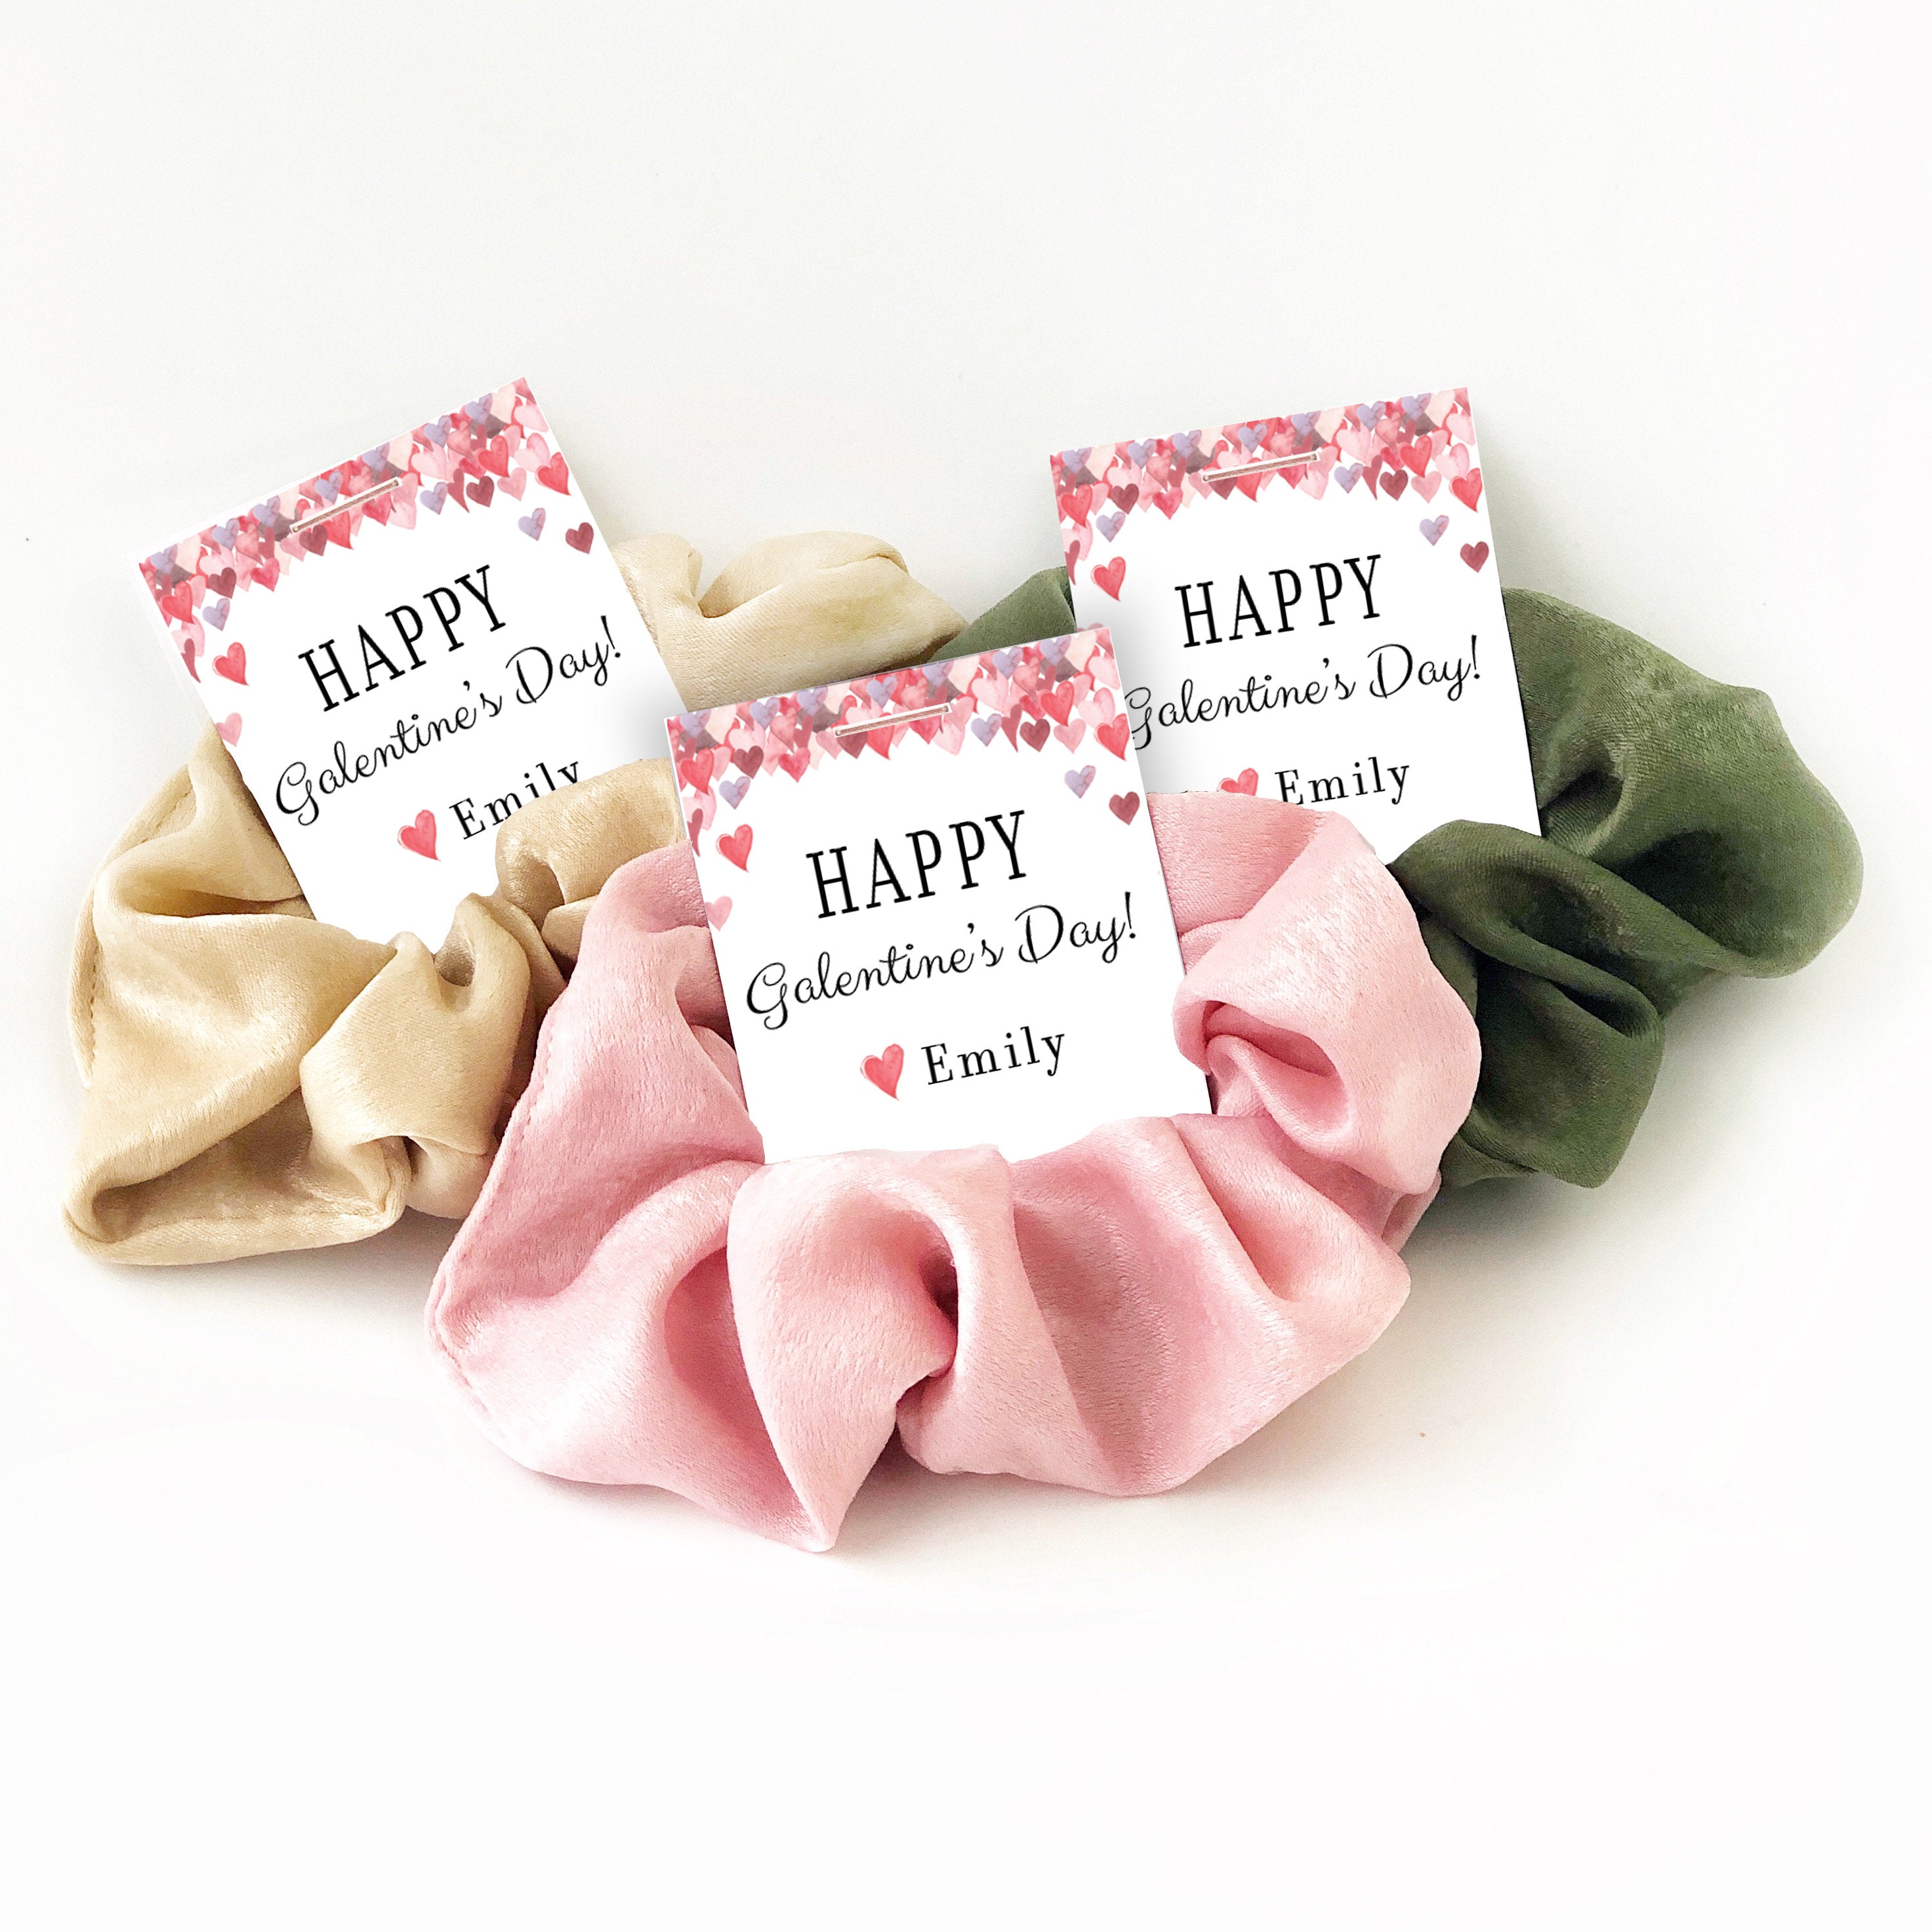 Hair Scrunchie Galentine Gift for Friends, Personalized Galentine Party Favors, Galentine's Day Scrunchy Hair Tie Favor - @PlumPolkaDot 